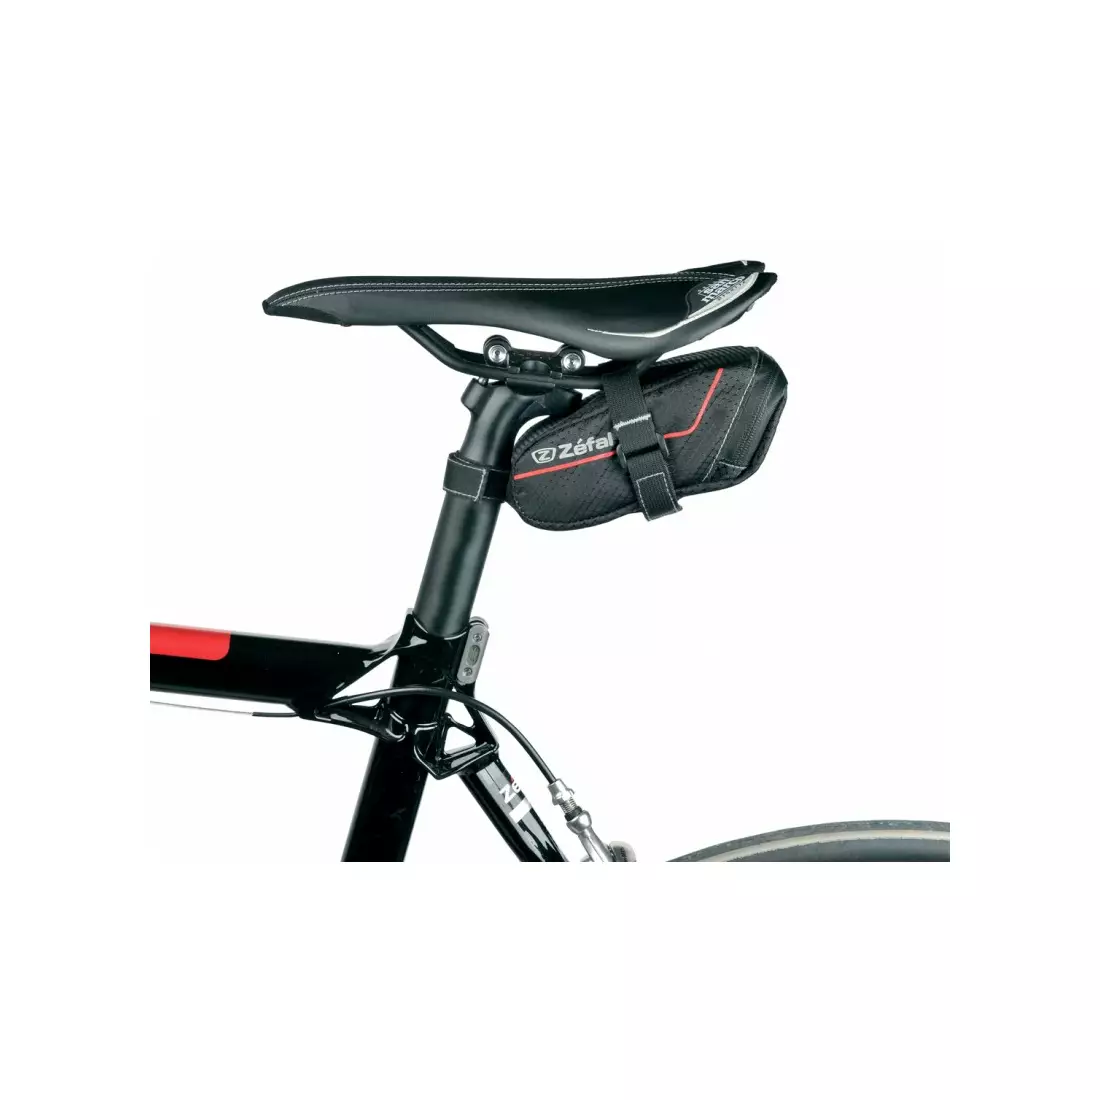 ZEFAL bicycle seatbag z light pack s grey ZF-7040